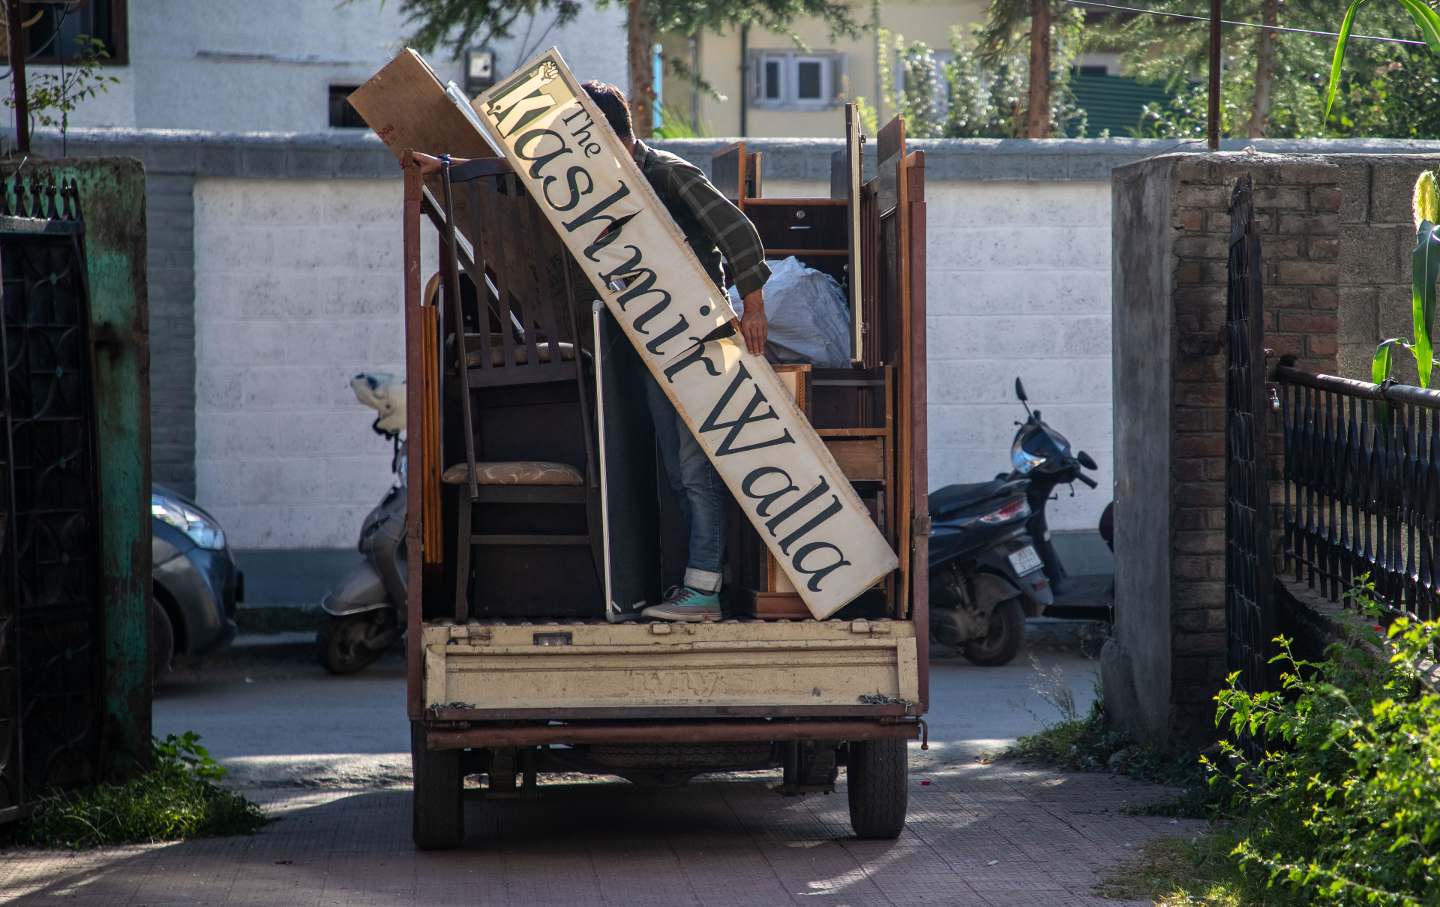 A vehicle carries office furniture of The Kashmir Walla while vacating its office in Kashmir capital Srinagar as they have been served notice by the landlord after their website and social media has been blocked in India under the Information Technology Act, 2000, by the government of India, according to statement published by the news website, a regional prominent independent news organisation based in Srinagar Kashmir, founded in 2009 by founder-editor Fahad Shah, who is currently in jail for 18 months over press coverage of a gunfight.